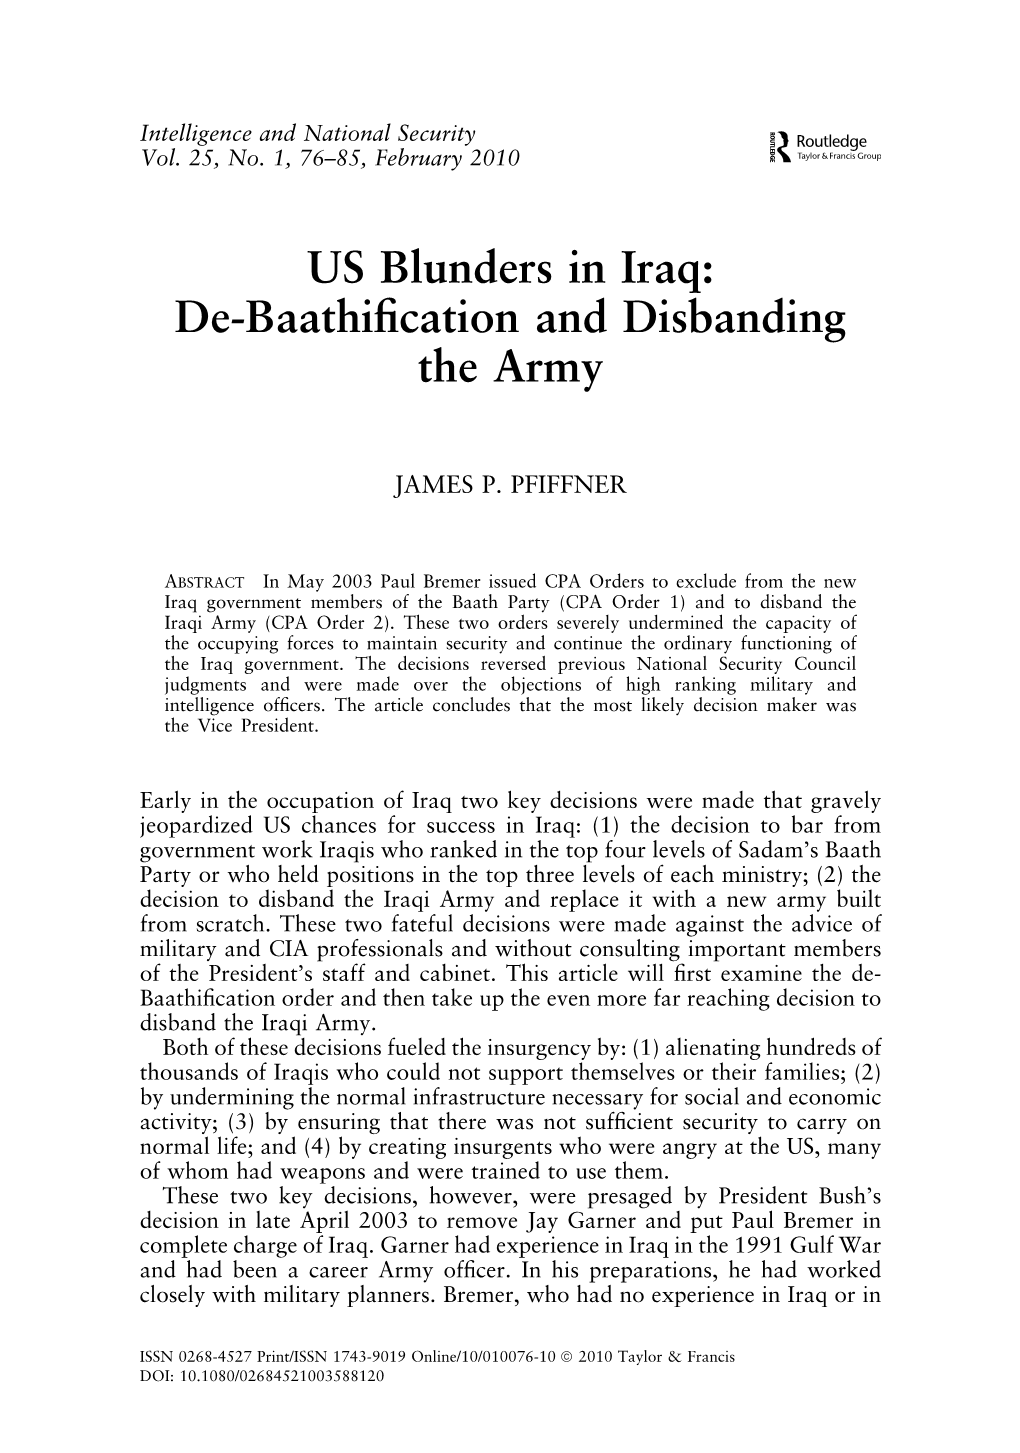 US Blunders in Iraq: De-Baathification and Disbanding the Army